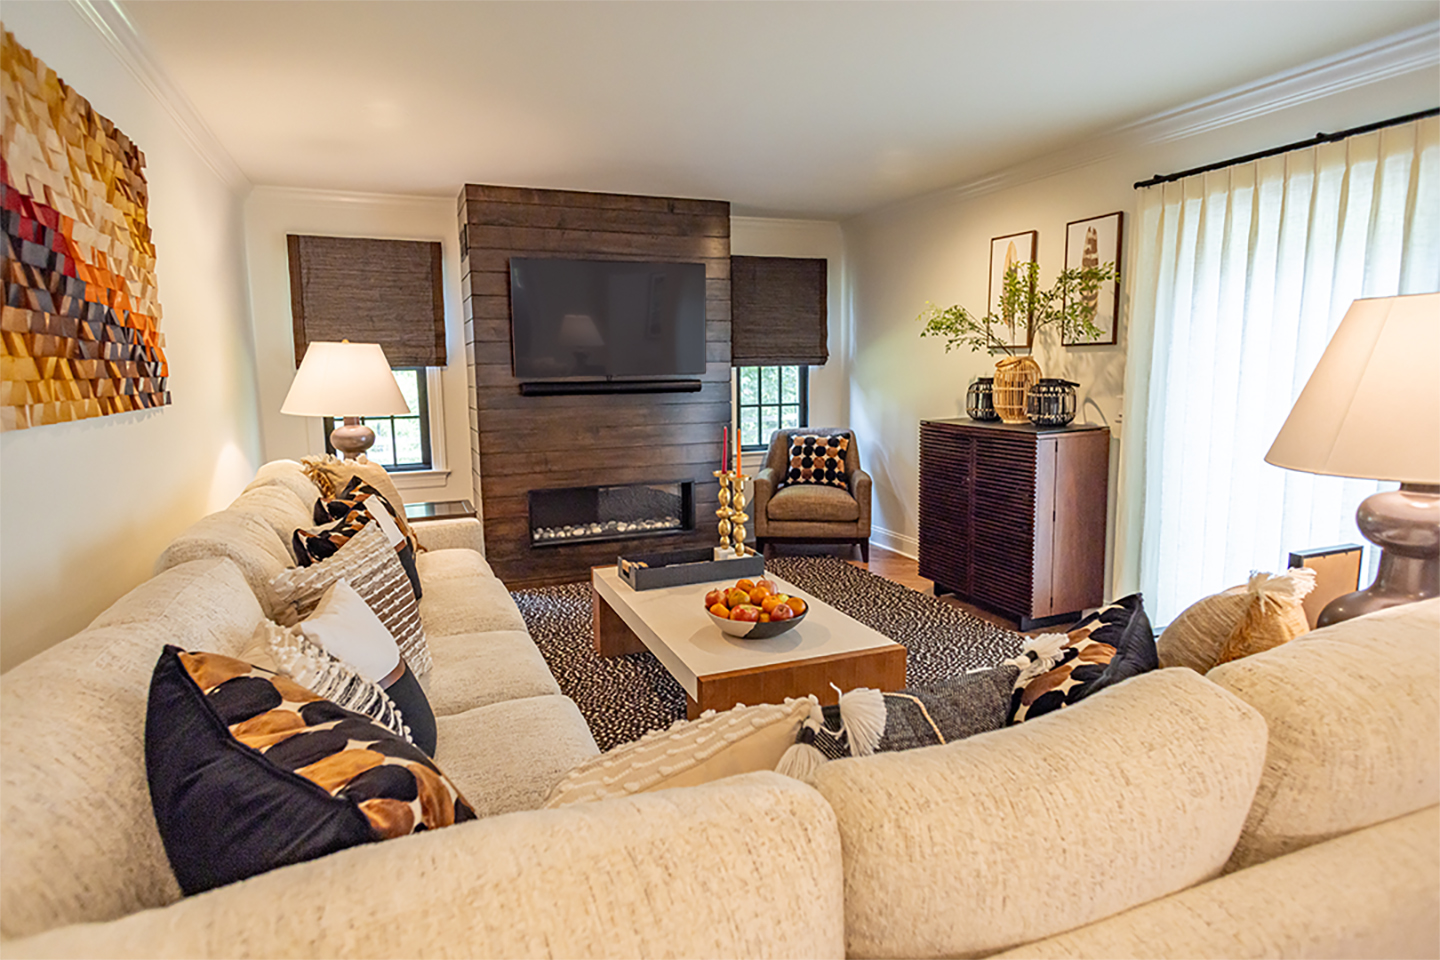 AFTER: This transformative renovation has breathed new life into this family room emerging as a haven of comfort and relaxation. The new focal point, the fireplace, increases the “cozy” level of the room, bathing the room with the warmth of the fire.